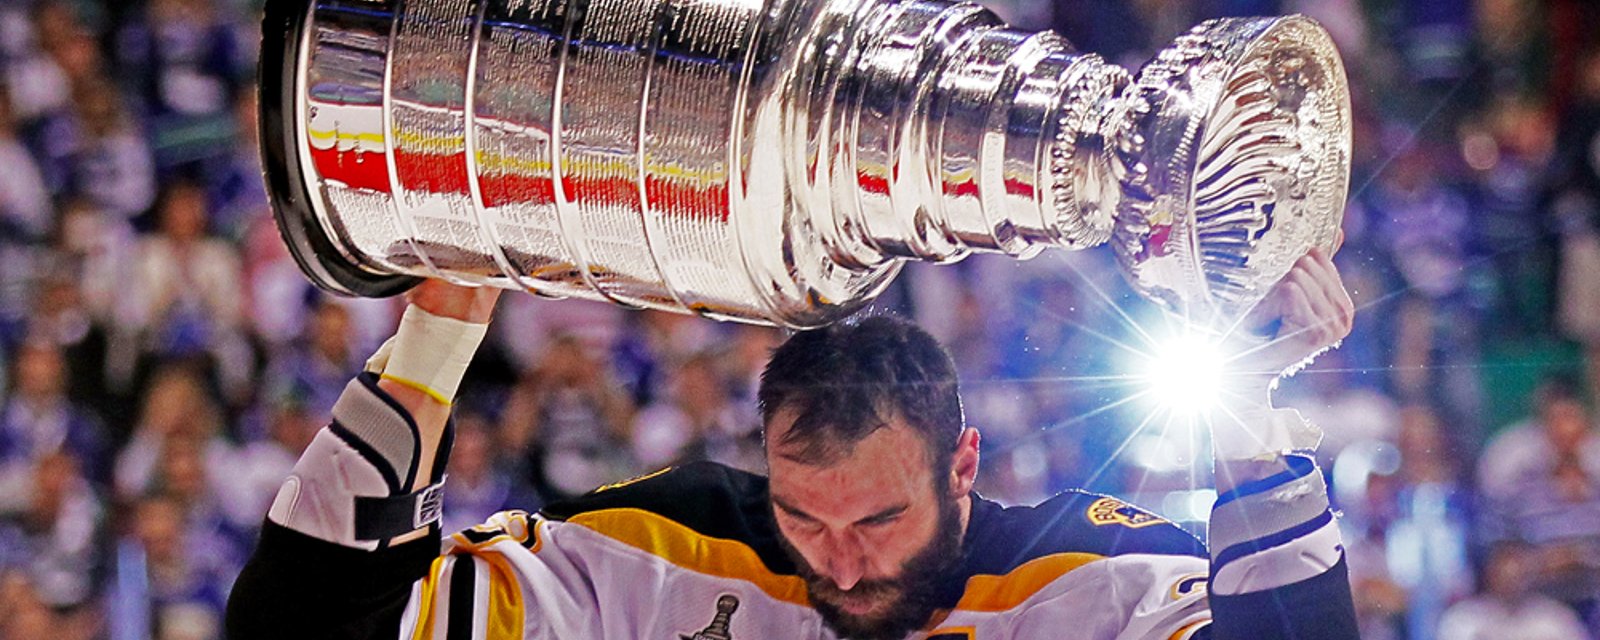 Chara confirms that he has signed with the Washington Capitals